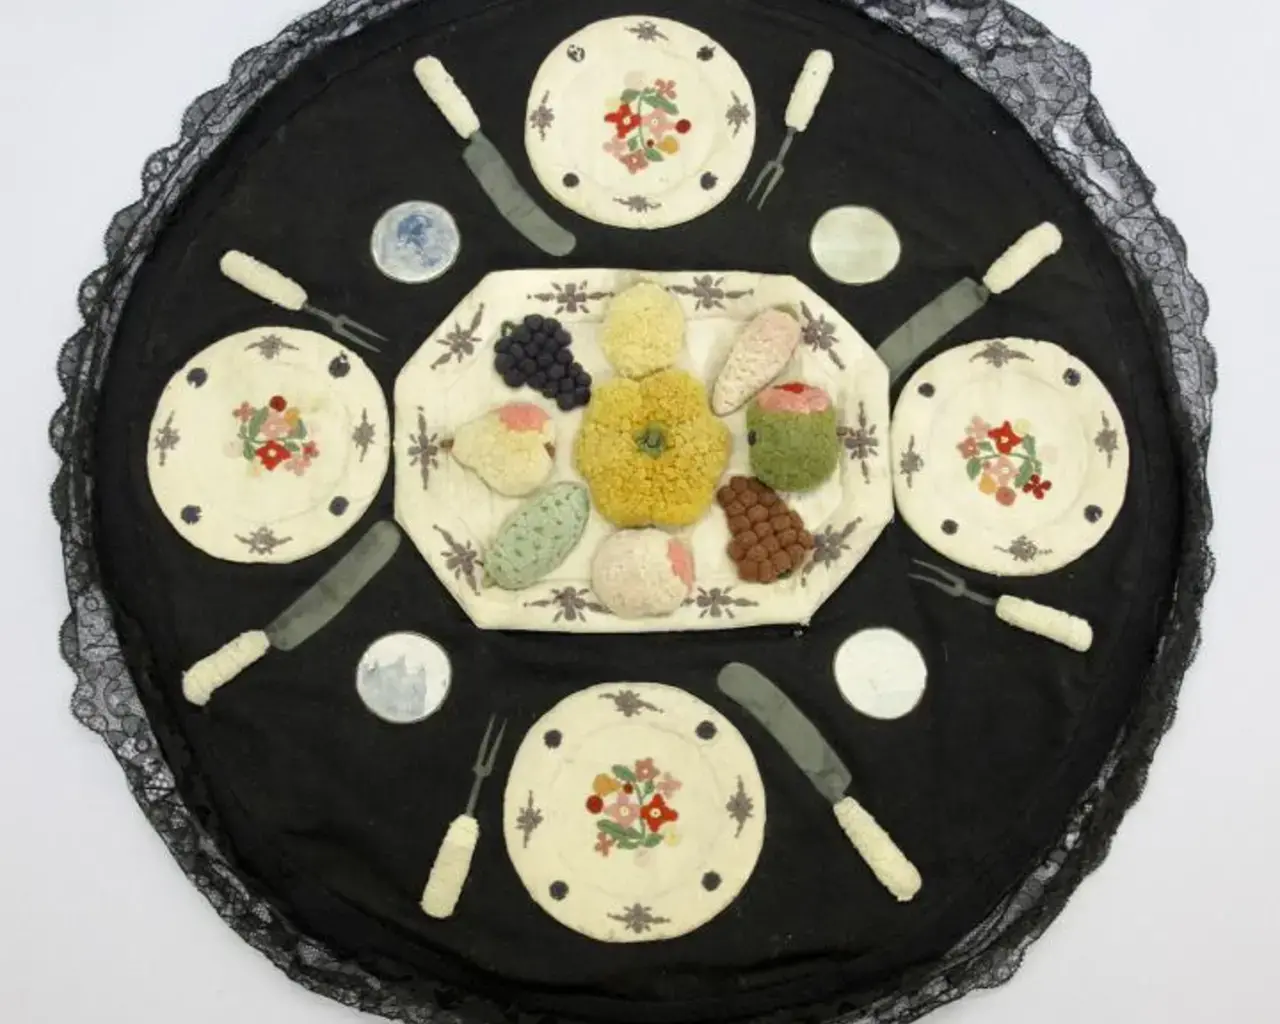 Front of a needlework table setting from the late 1800s. Photo courtesy of the Schwenkfelder Library &amp; Heritage Center in Pennsburg, PA.